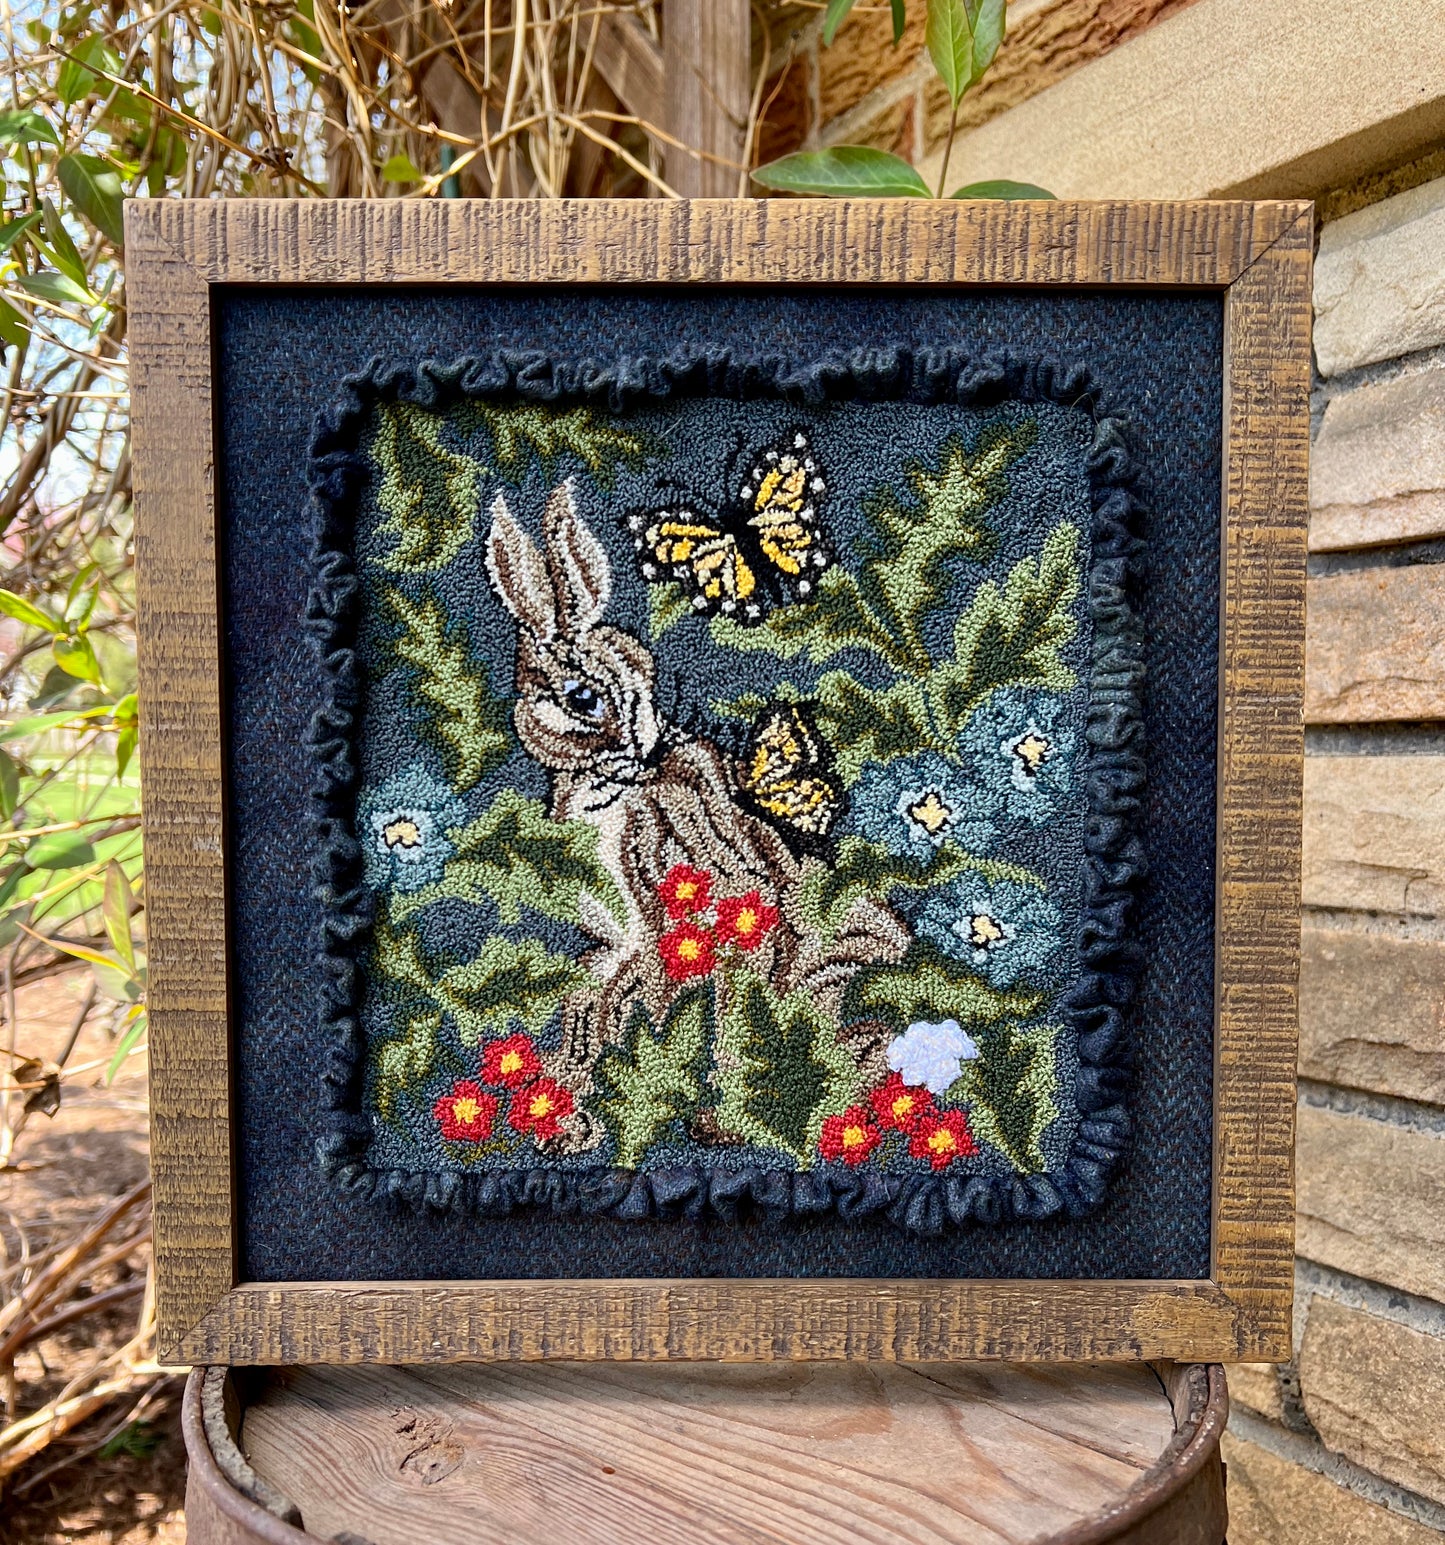 Hare with Friend Punch Needle Pattern by Orphaned Wool. This lovely bunny and butterflies design was created using DMC Floss. This little rabbit is nestled in with flowers and foliage and sweet butterflies.